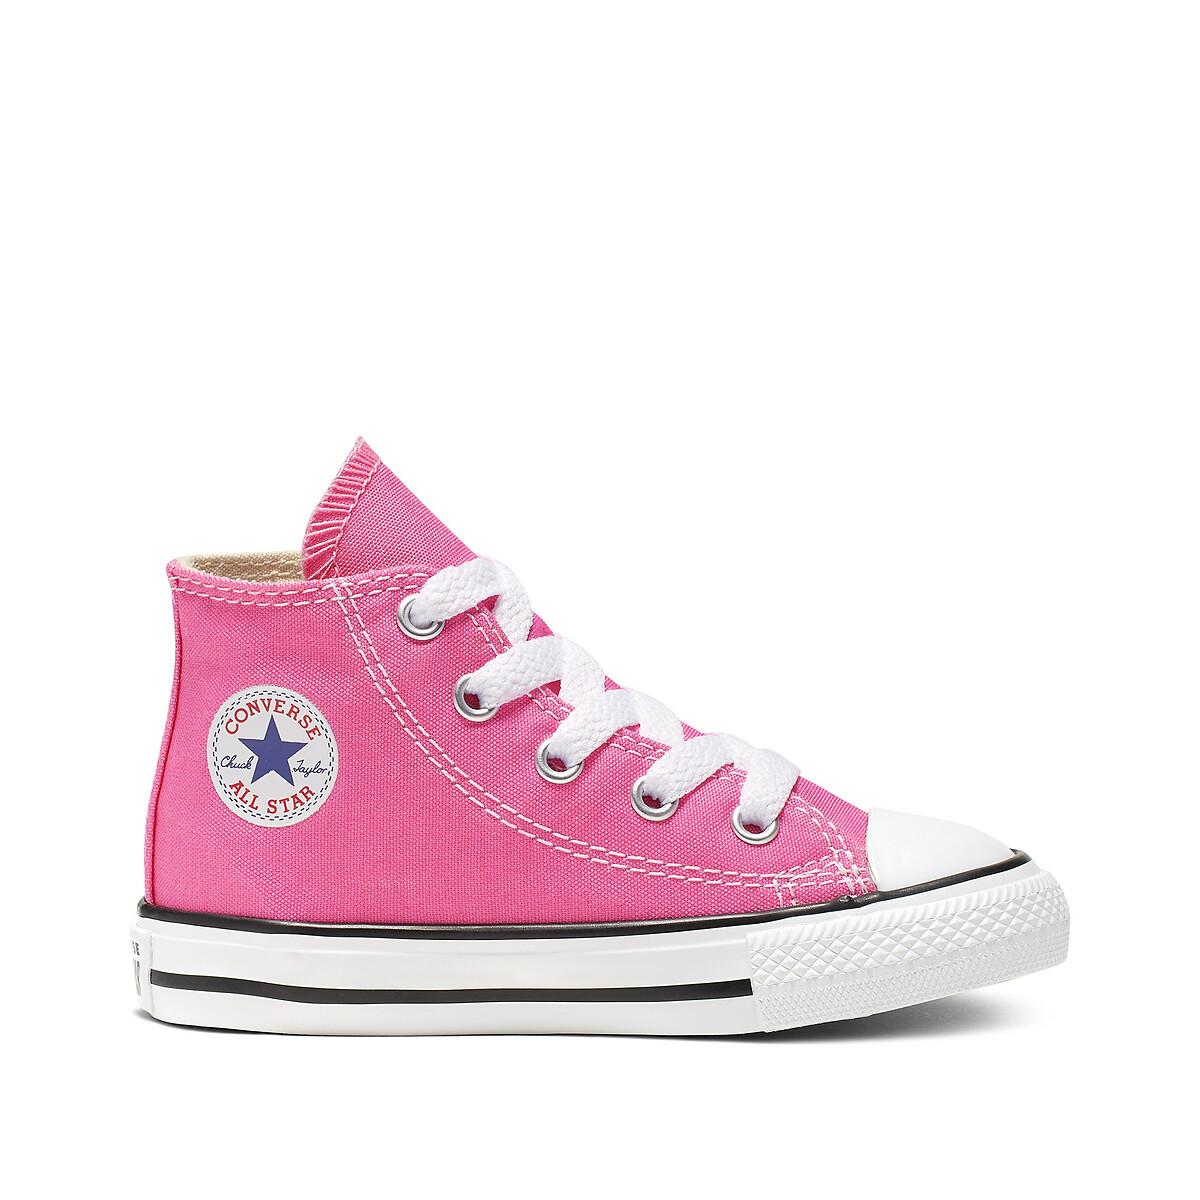 childrens pink converse high tops